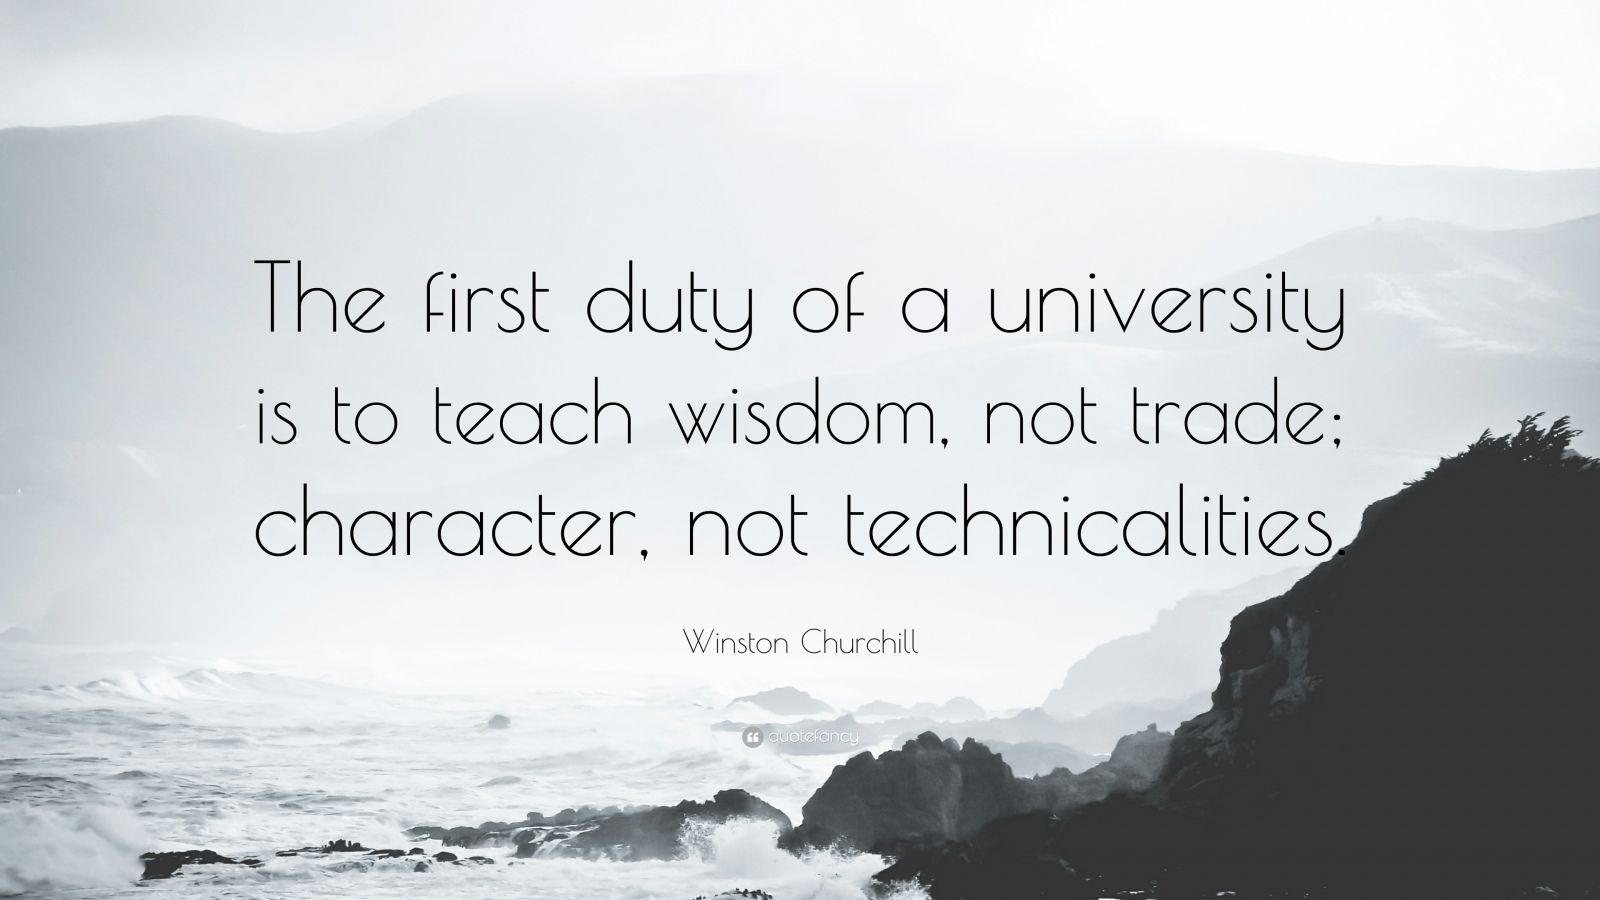 Winston Churchill Quote: “The first duty of a university is to teach